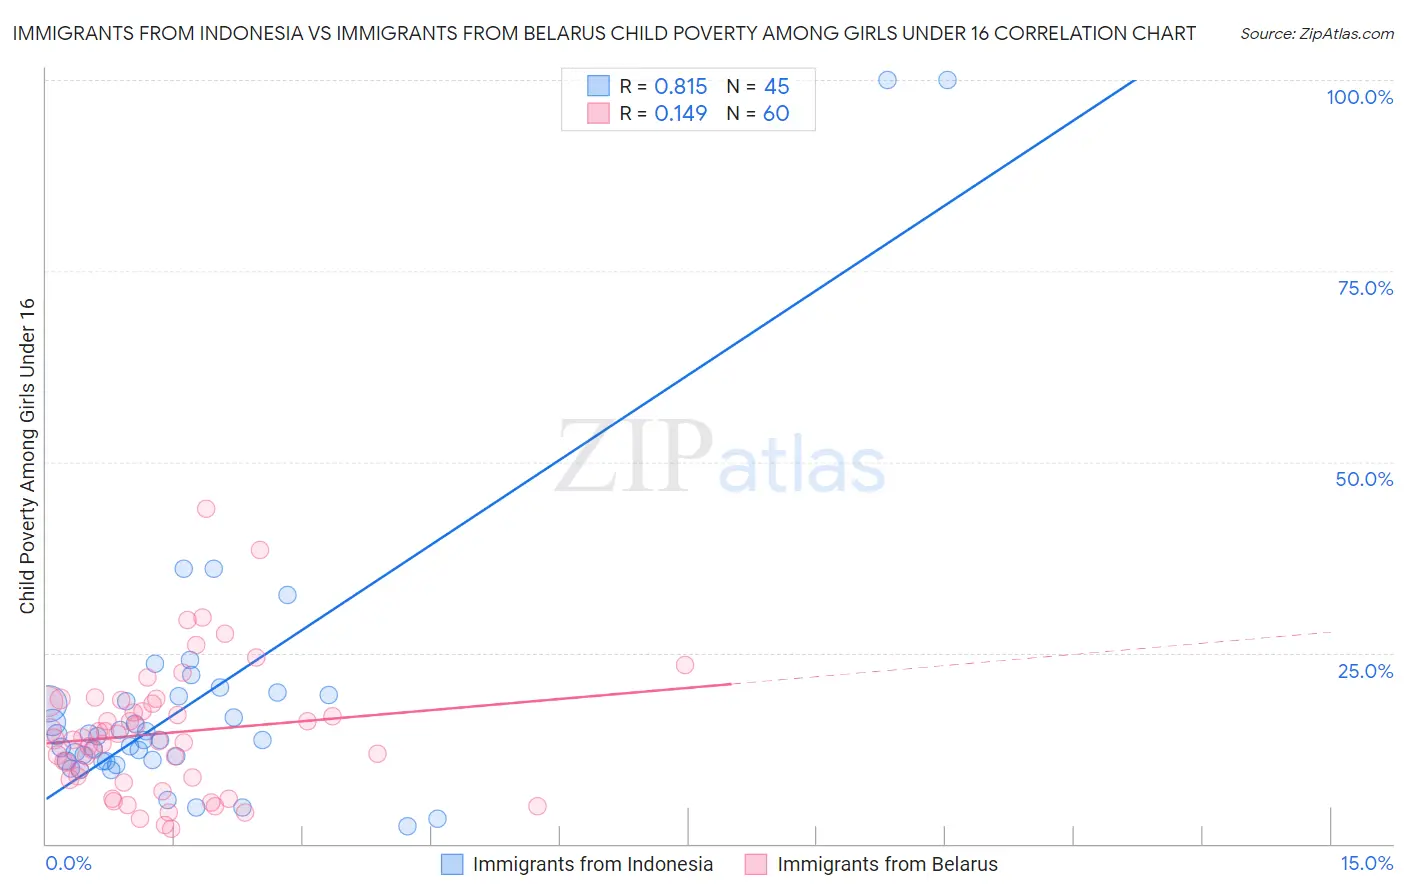 Immigrants from Indonesia vs Immigrants from Belarus Child Poverty Among Girls Under 16